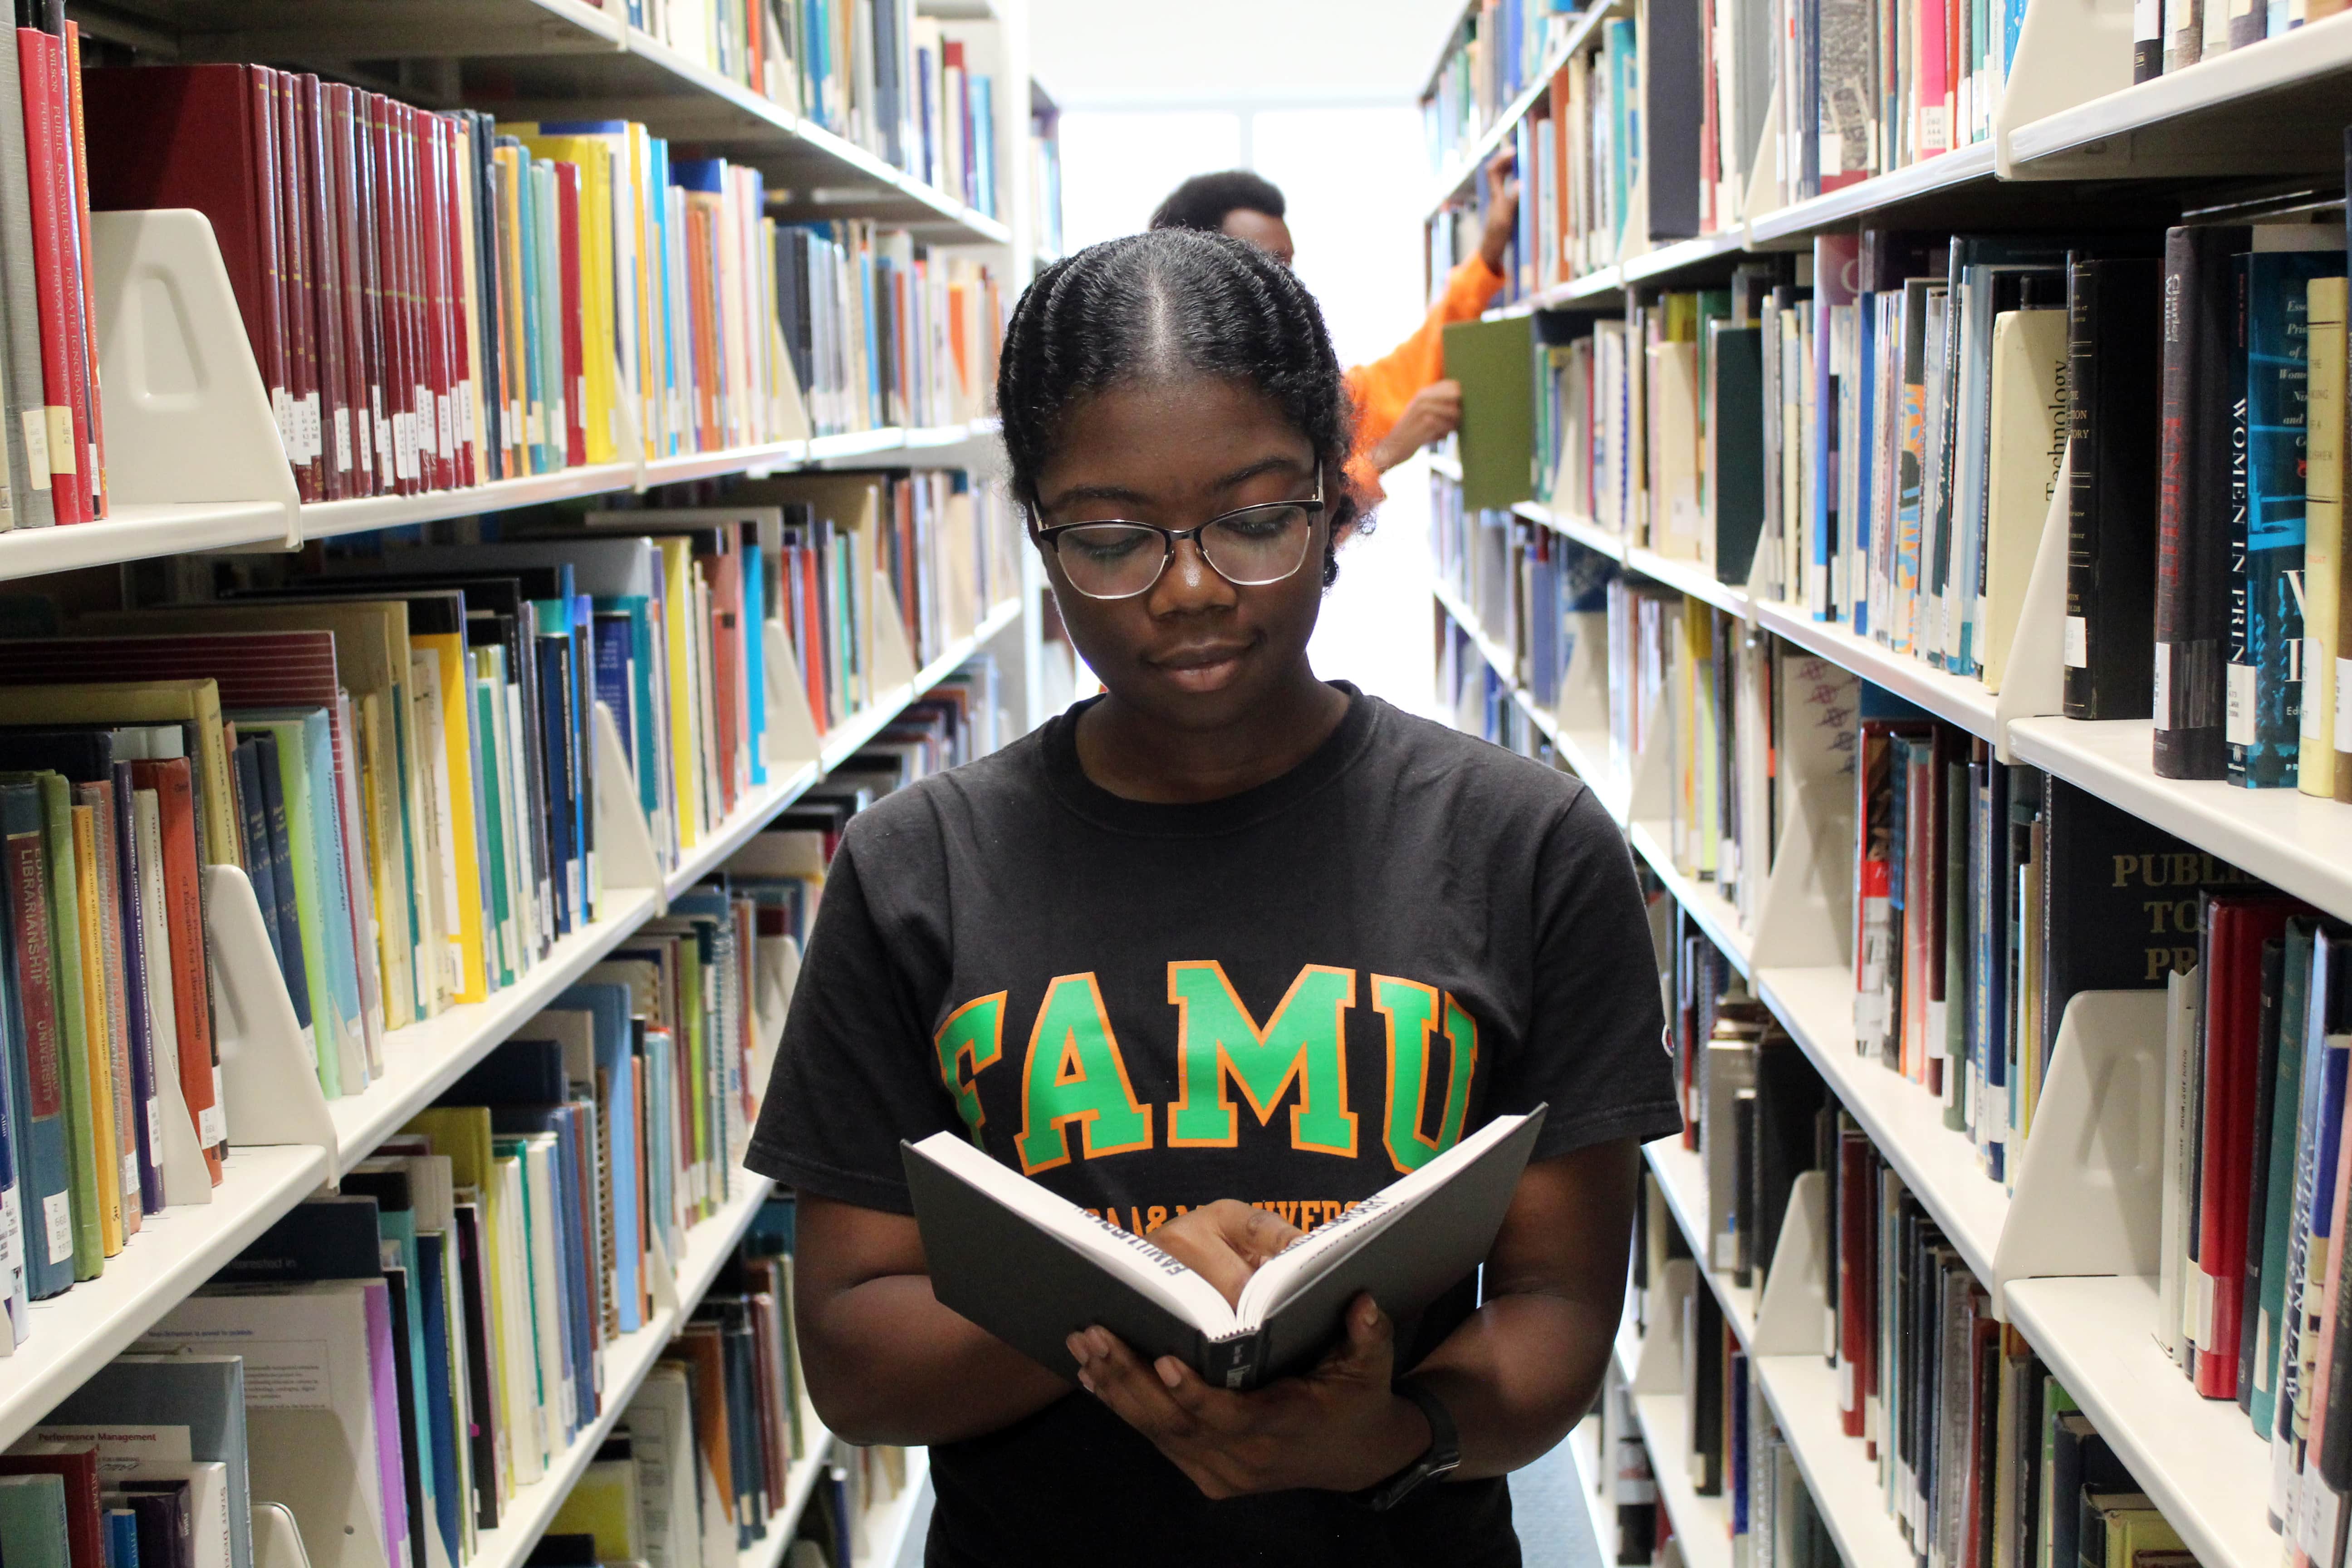 The Engineering Living Learning Community is for FAMU students pursuing careers in Biomedical, Chemical, Civil, Computer, Electrical, Environmental, Industrial, and Mechanical Engineering.   